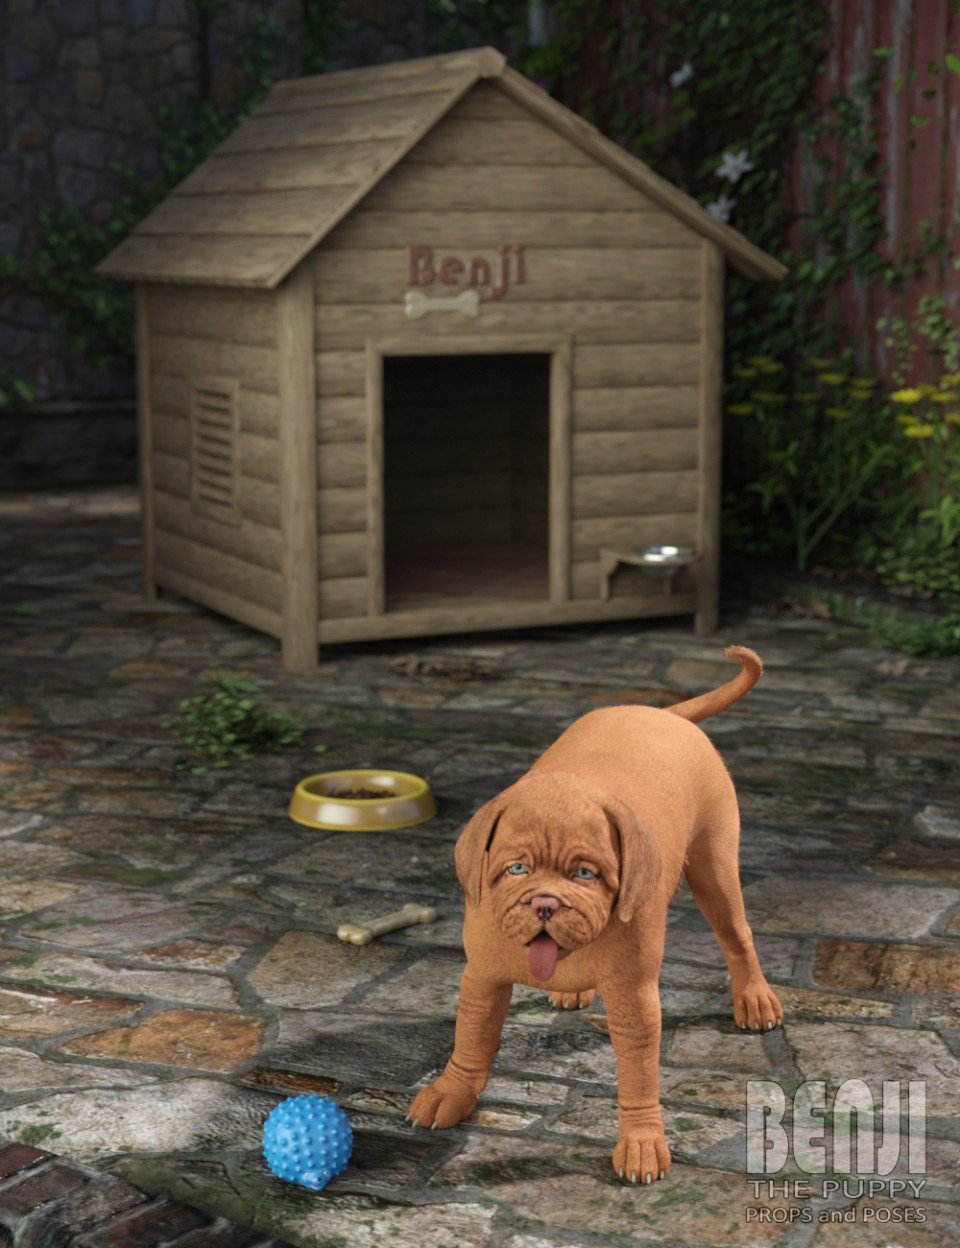 Benji The Puppy Props and Poses_DAZ3DDL